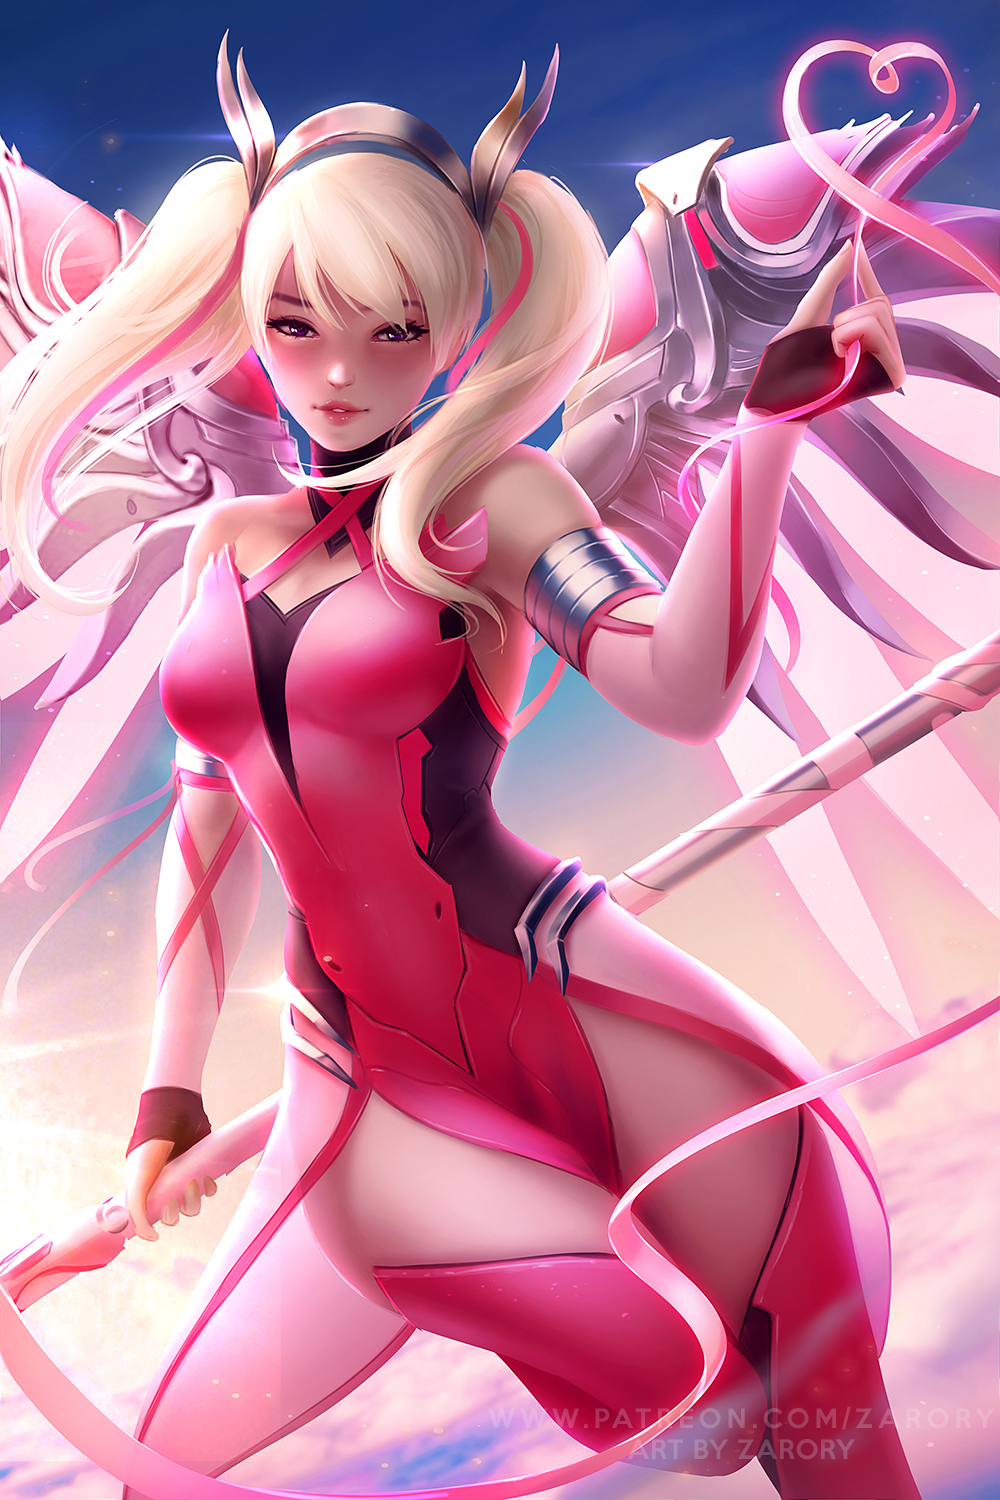 Zarory Drawing Overwatch Women Mercy Blonde Pigtails Weapon Heart Design Pink Pink Clothing Wings Fl 1000x1500